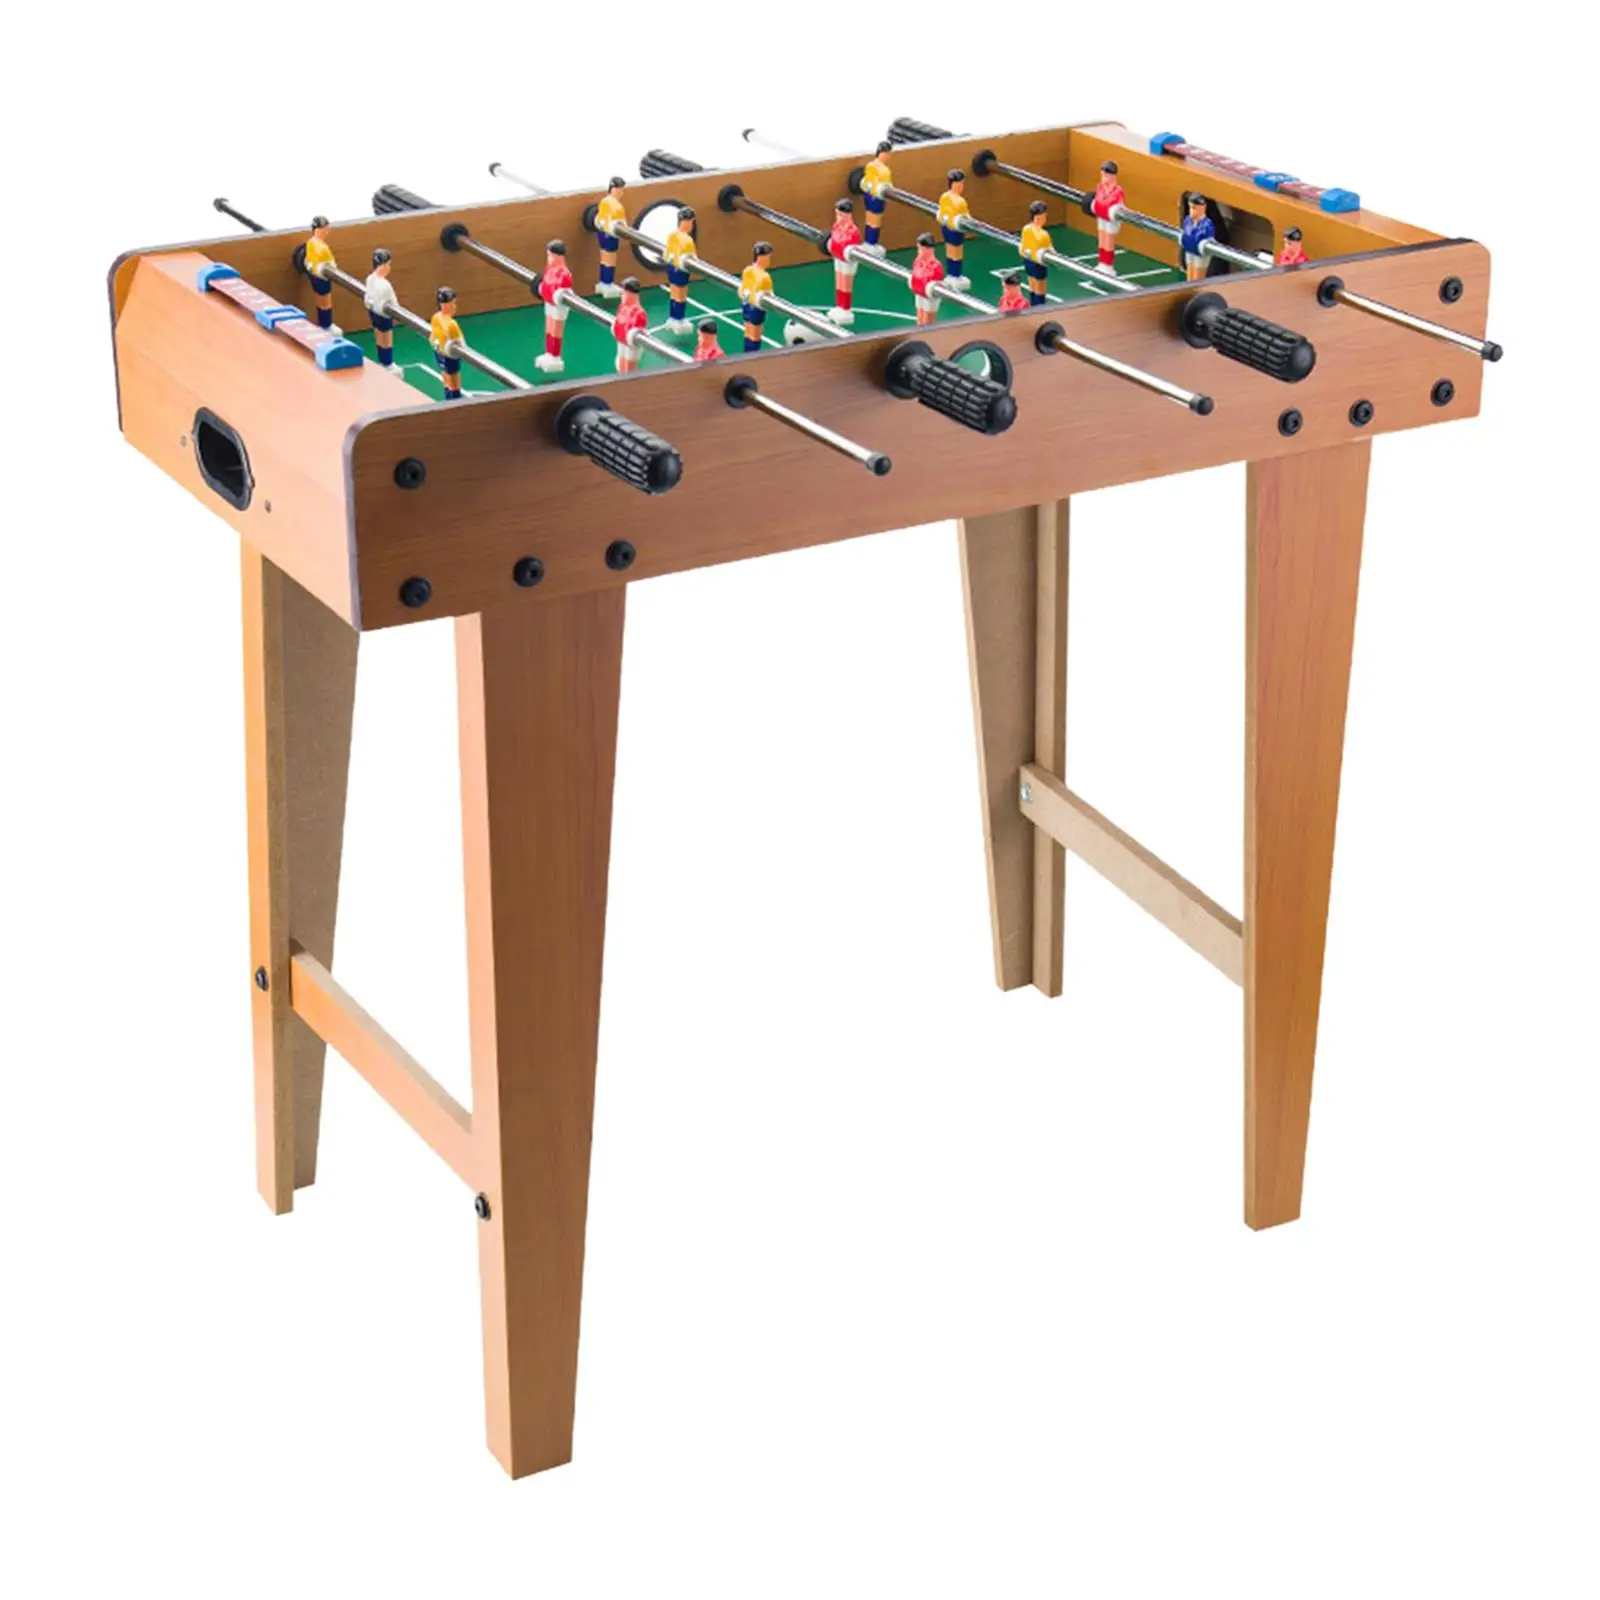 Portable Foosball Table Tabletop Football Game Parent Child Interactive Toy Sports Table Top Football Table for Adults Kids